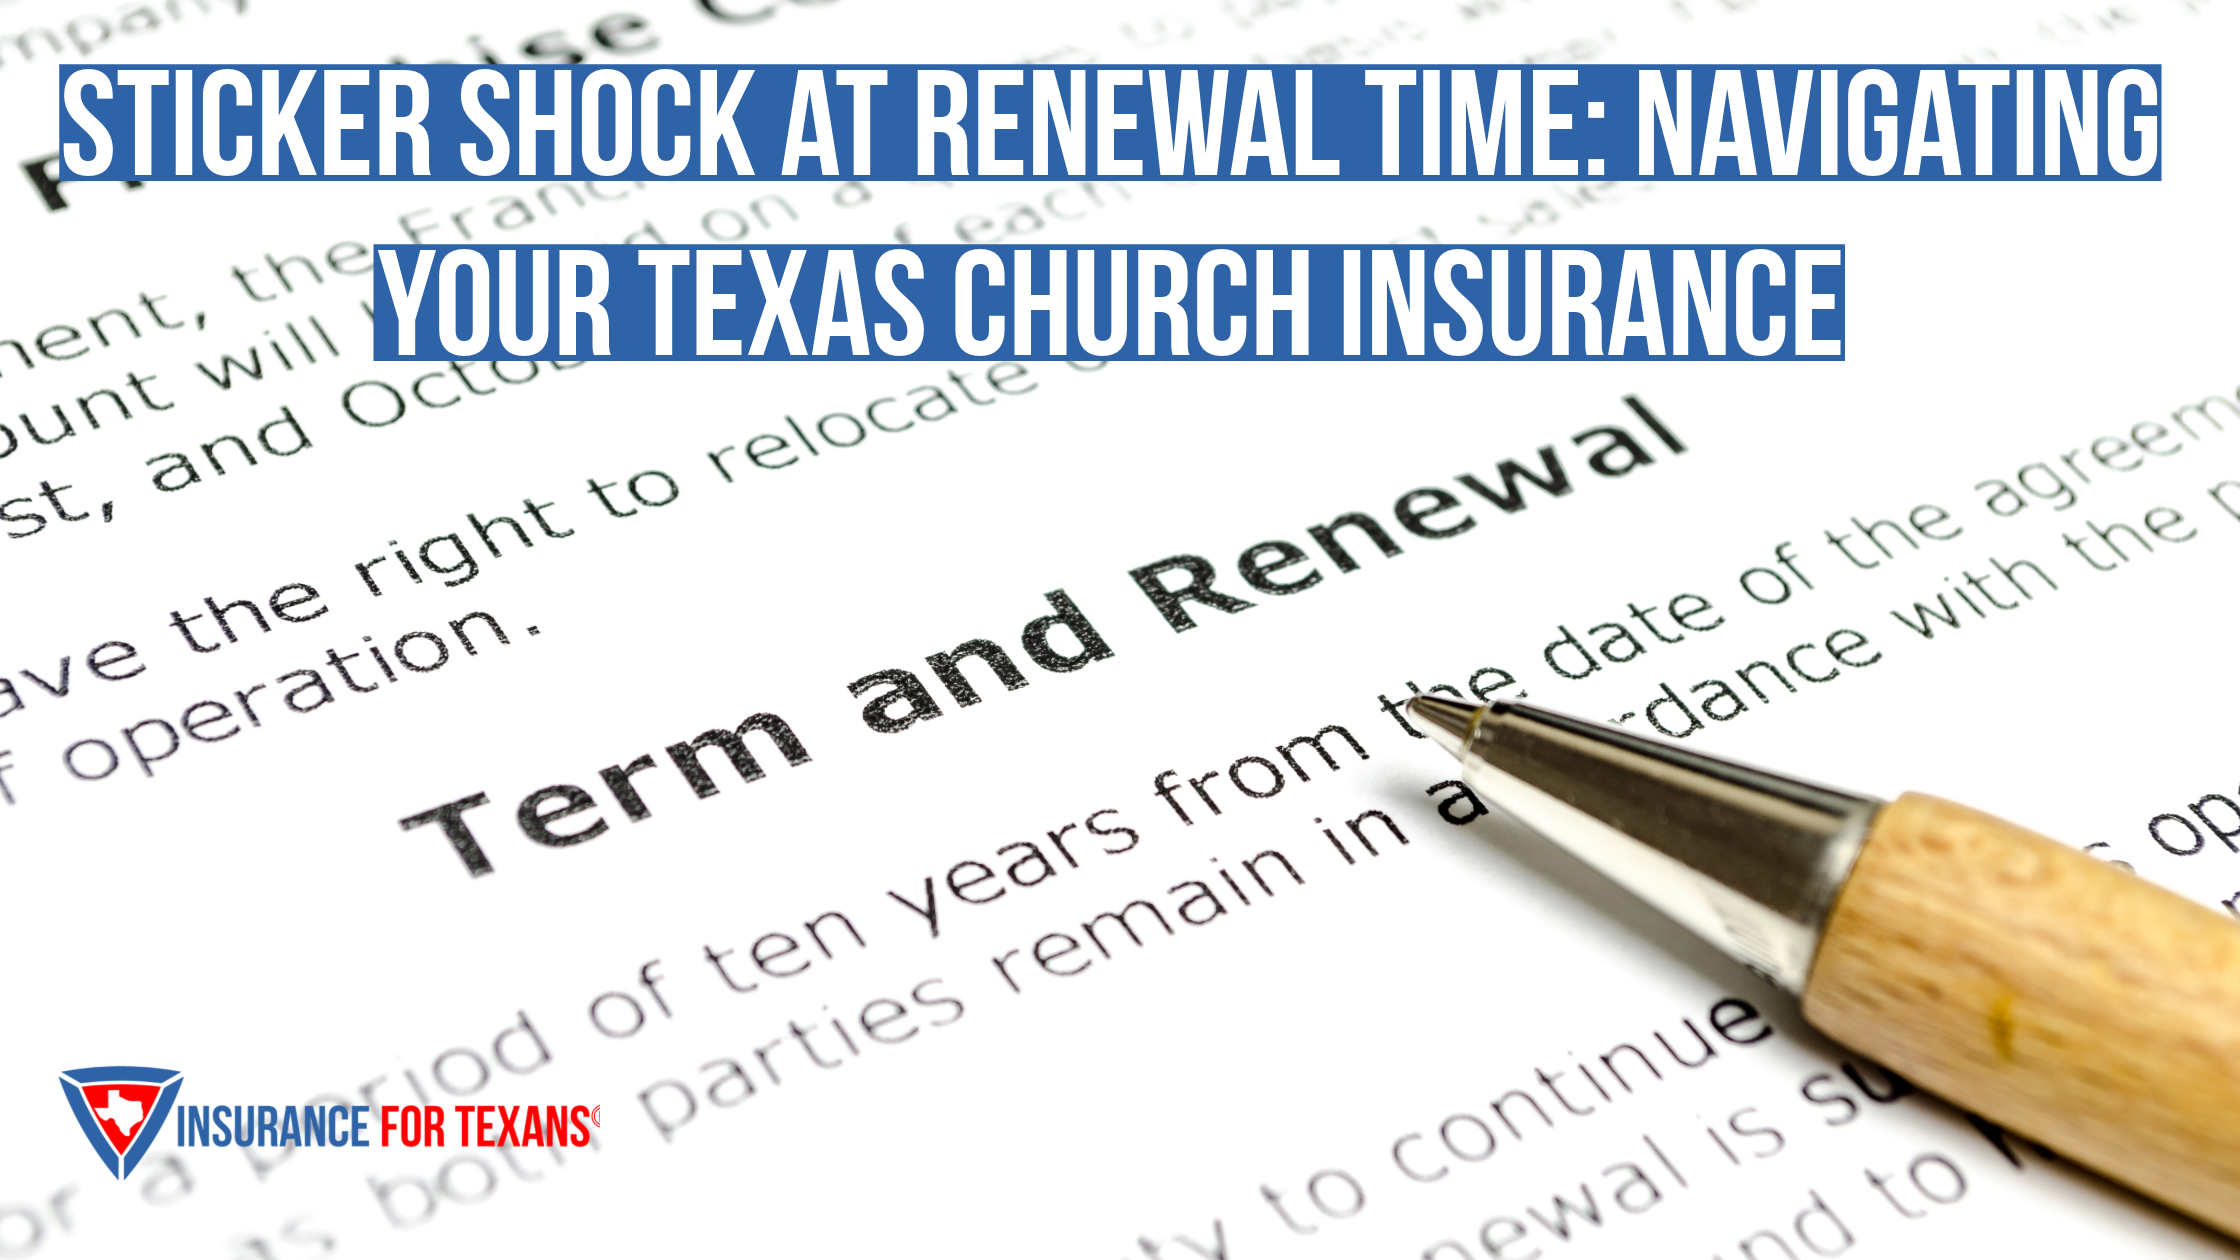 Sticker Shock at Renewal Time: Navigating Your Texas Church Insurance